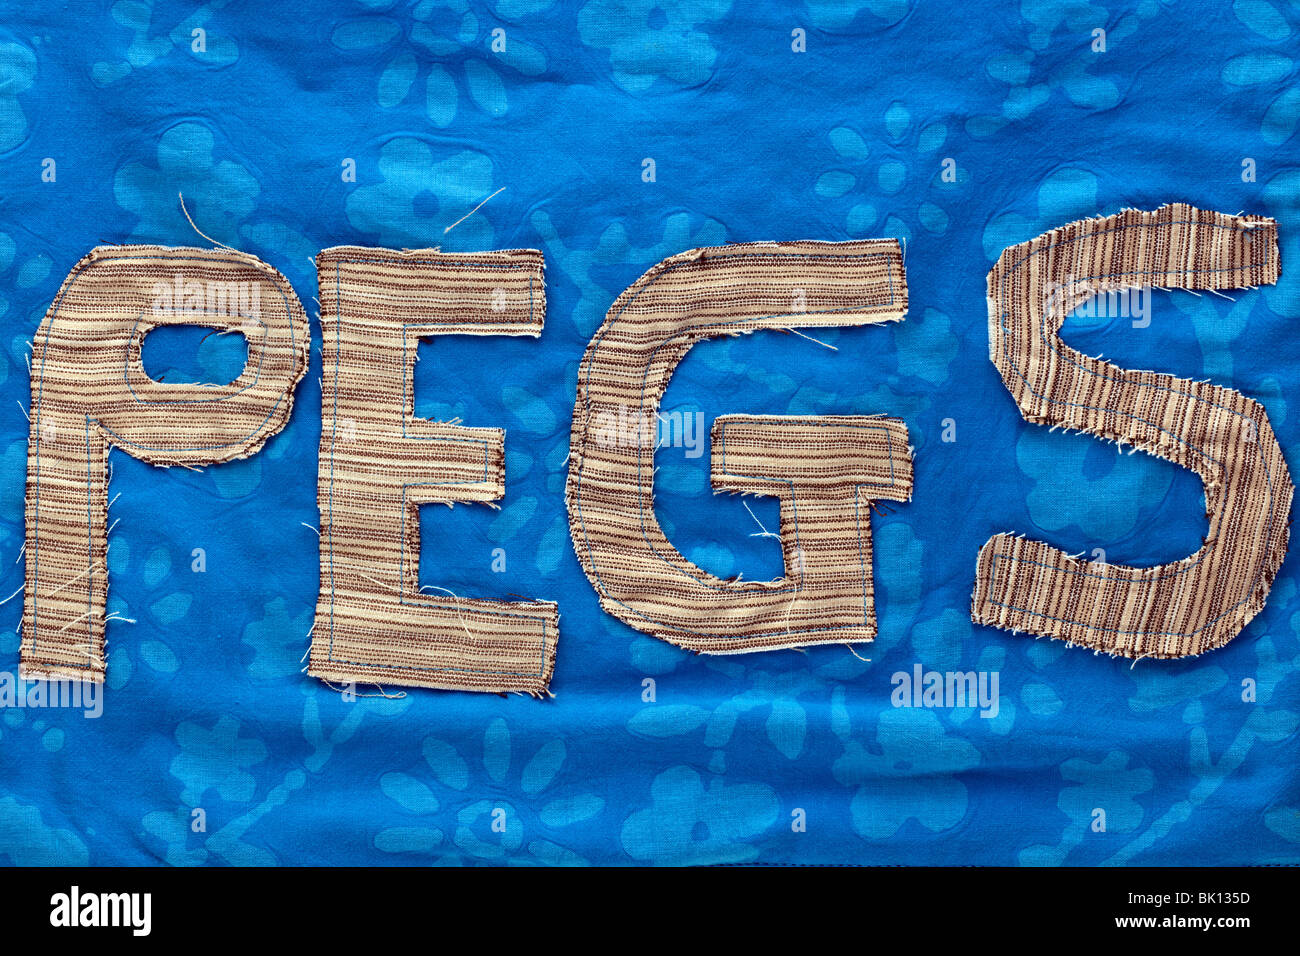 The word pegs stitched onto blue flowered cotton material Stock Photo